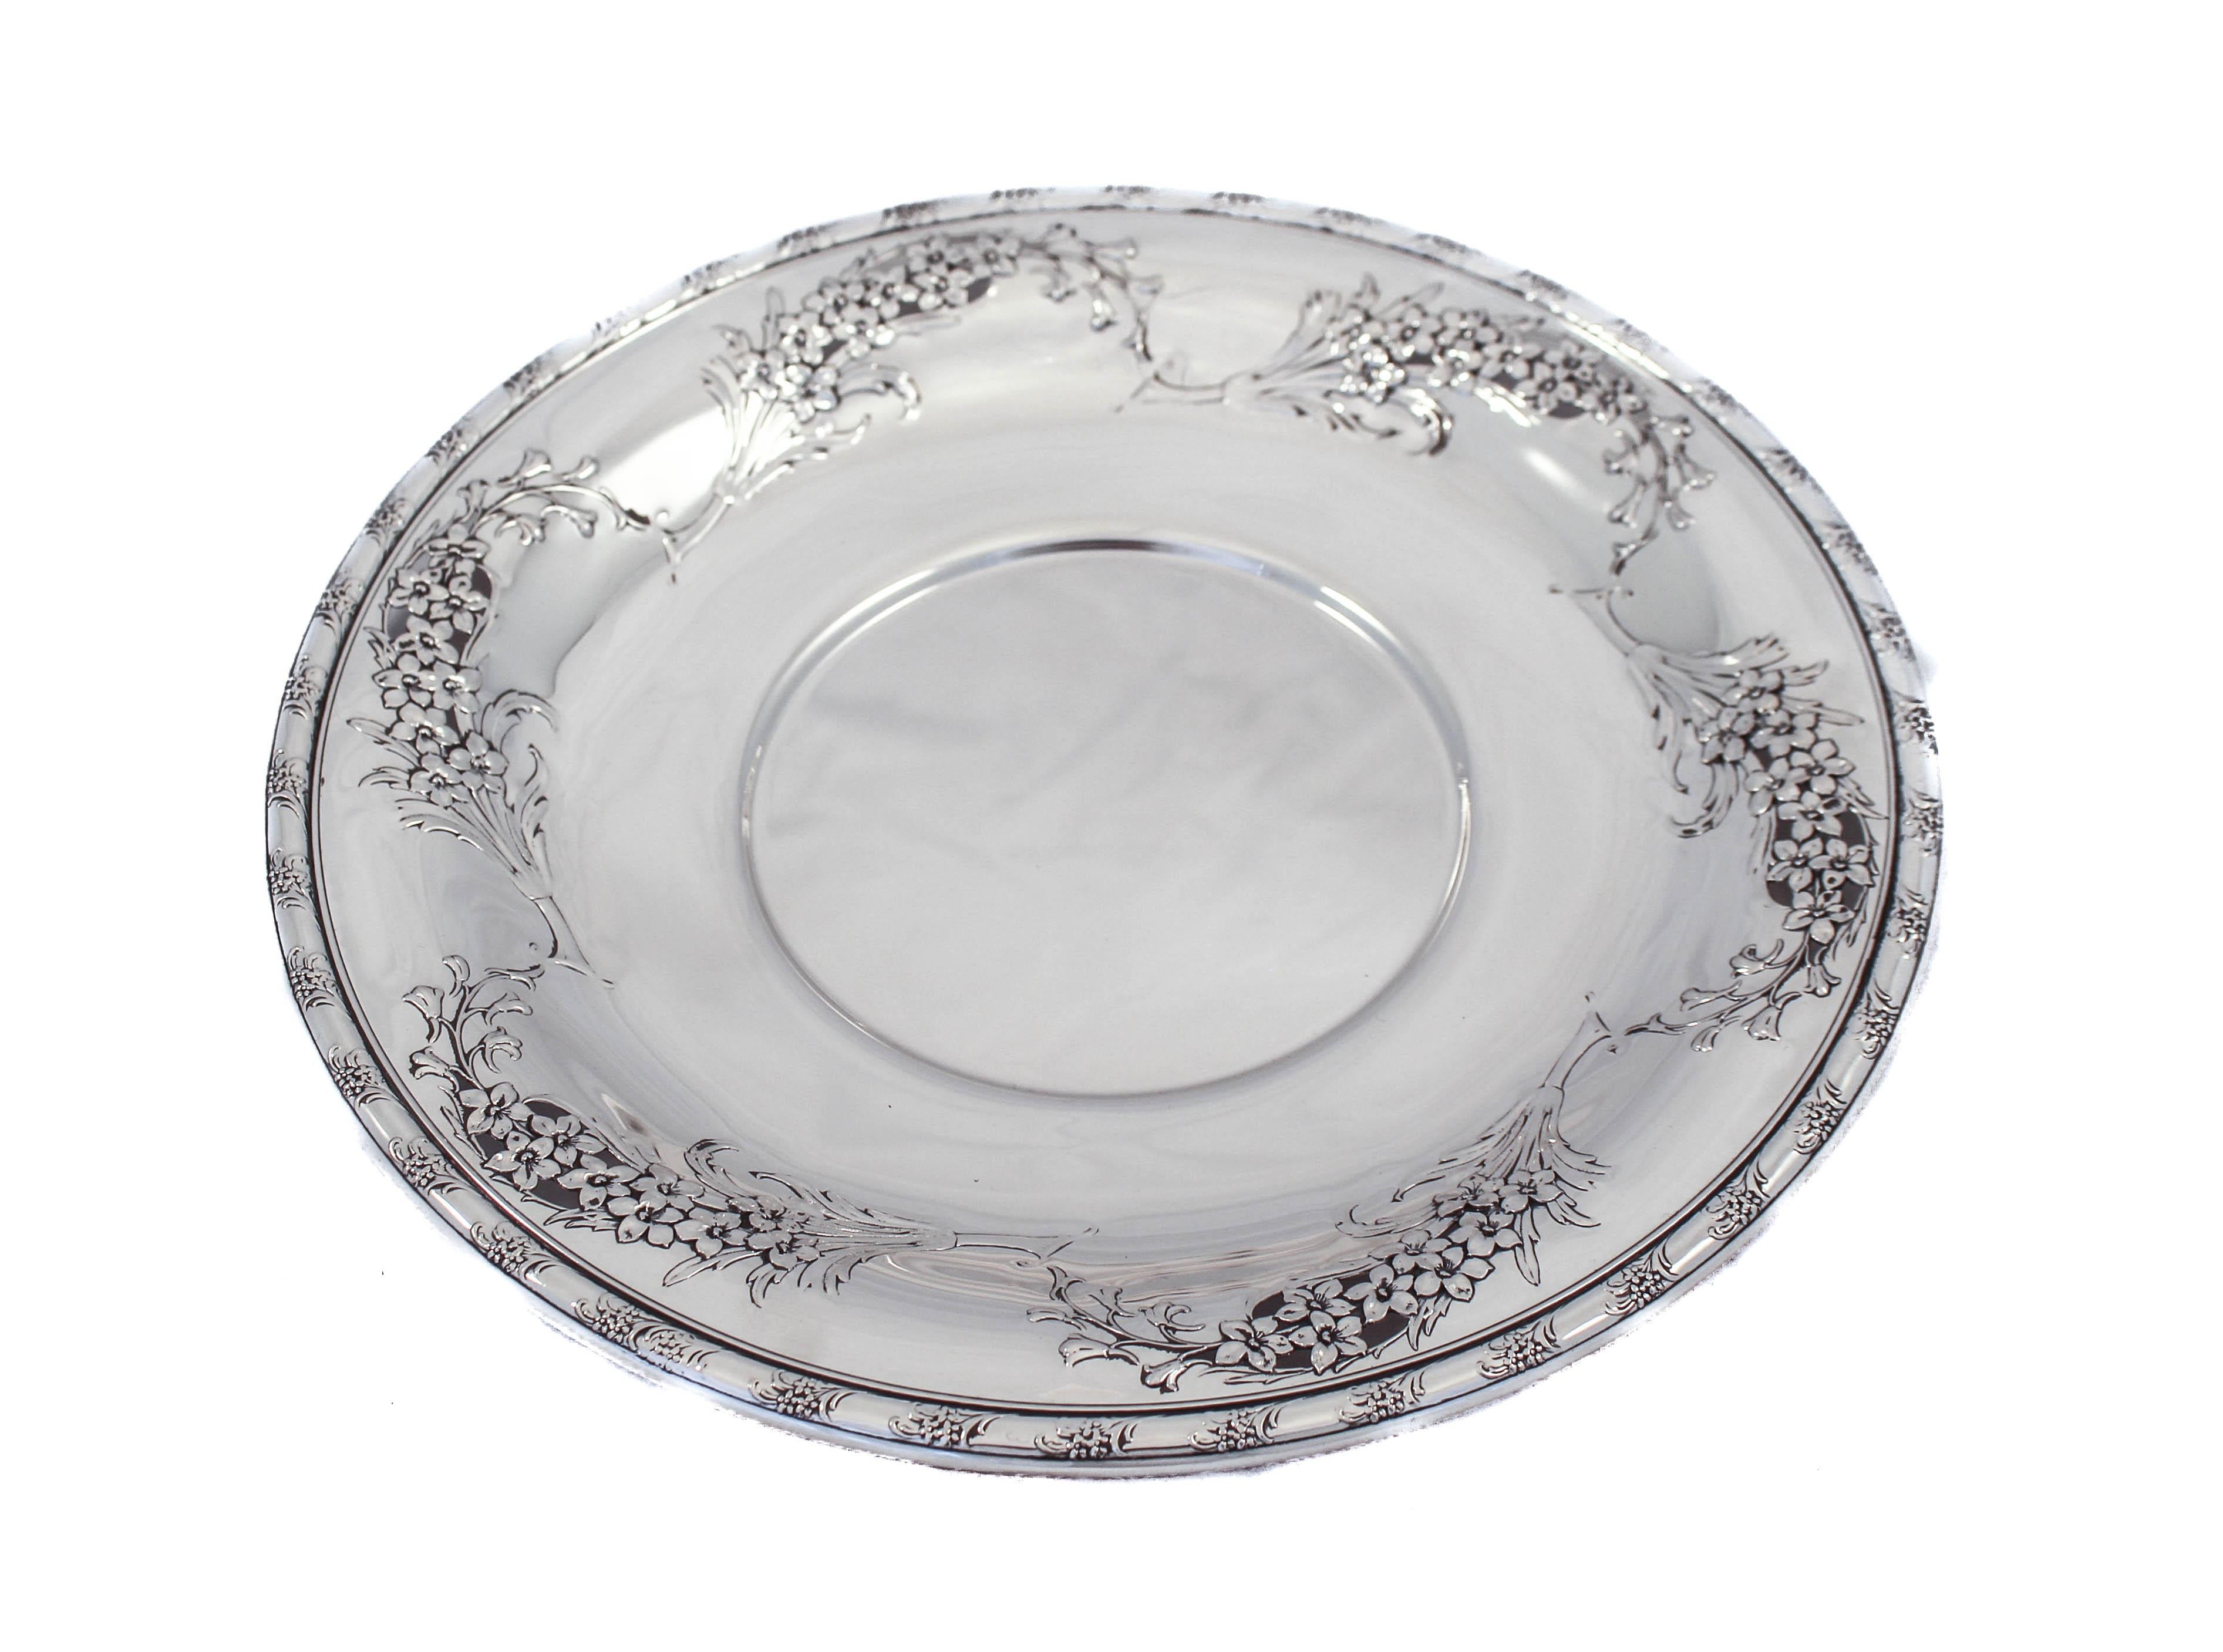 We are delighted to offer this sterling silver tray in the “Larkspur” pattern by Wallace Silversmiths. Six bouquets of flowers decorate the edge, each connecting to the next. The flowers seem to be draping loosely and graciously. Around the rim